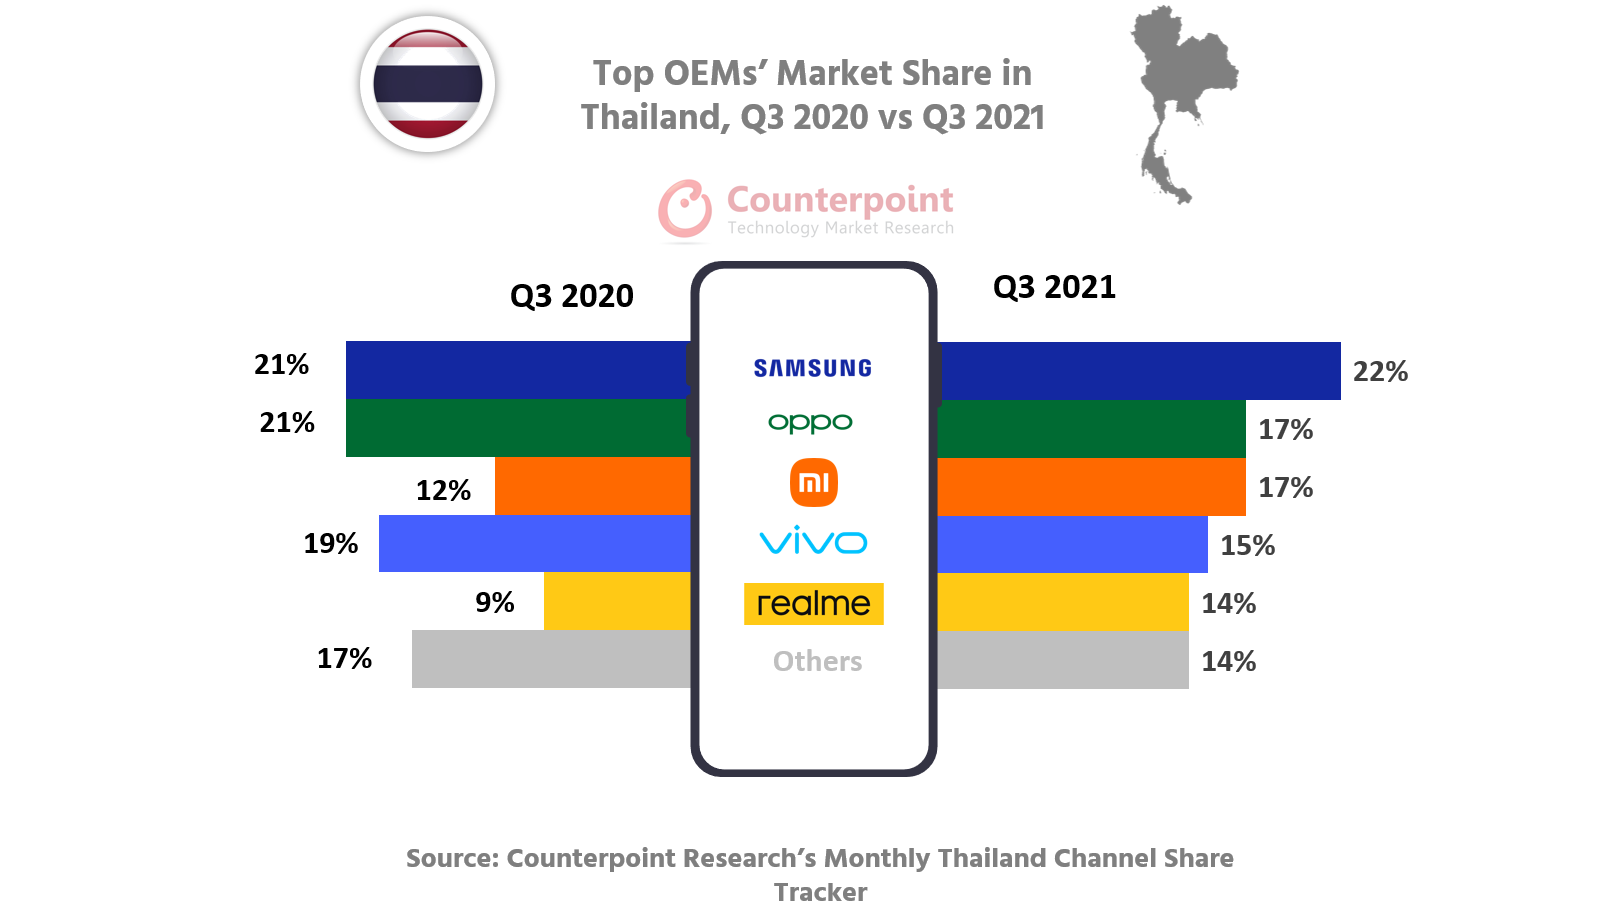 Top OEMs’ Market Share in Thailand, Q3 2020 vs Q3 2021